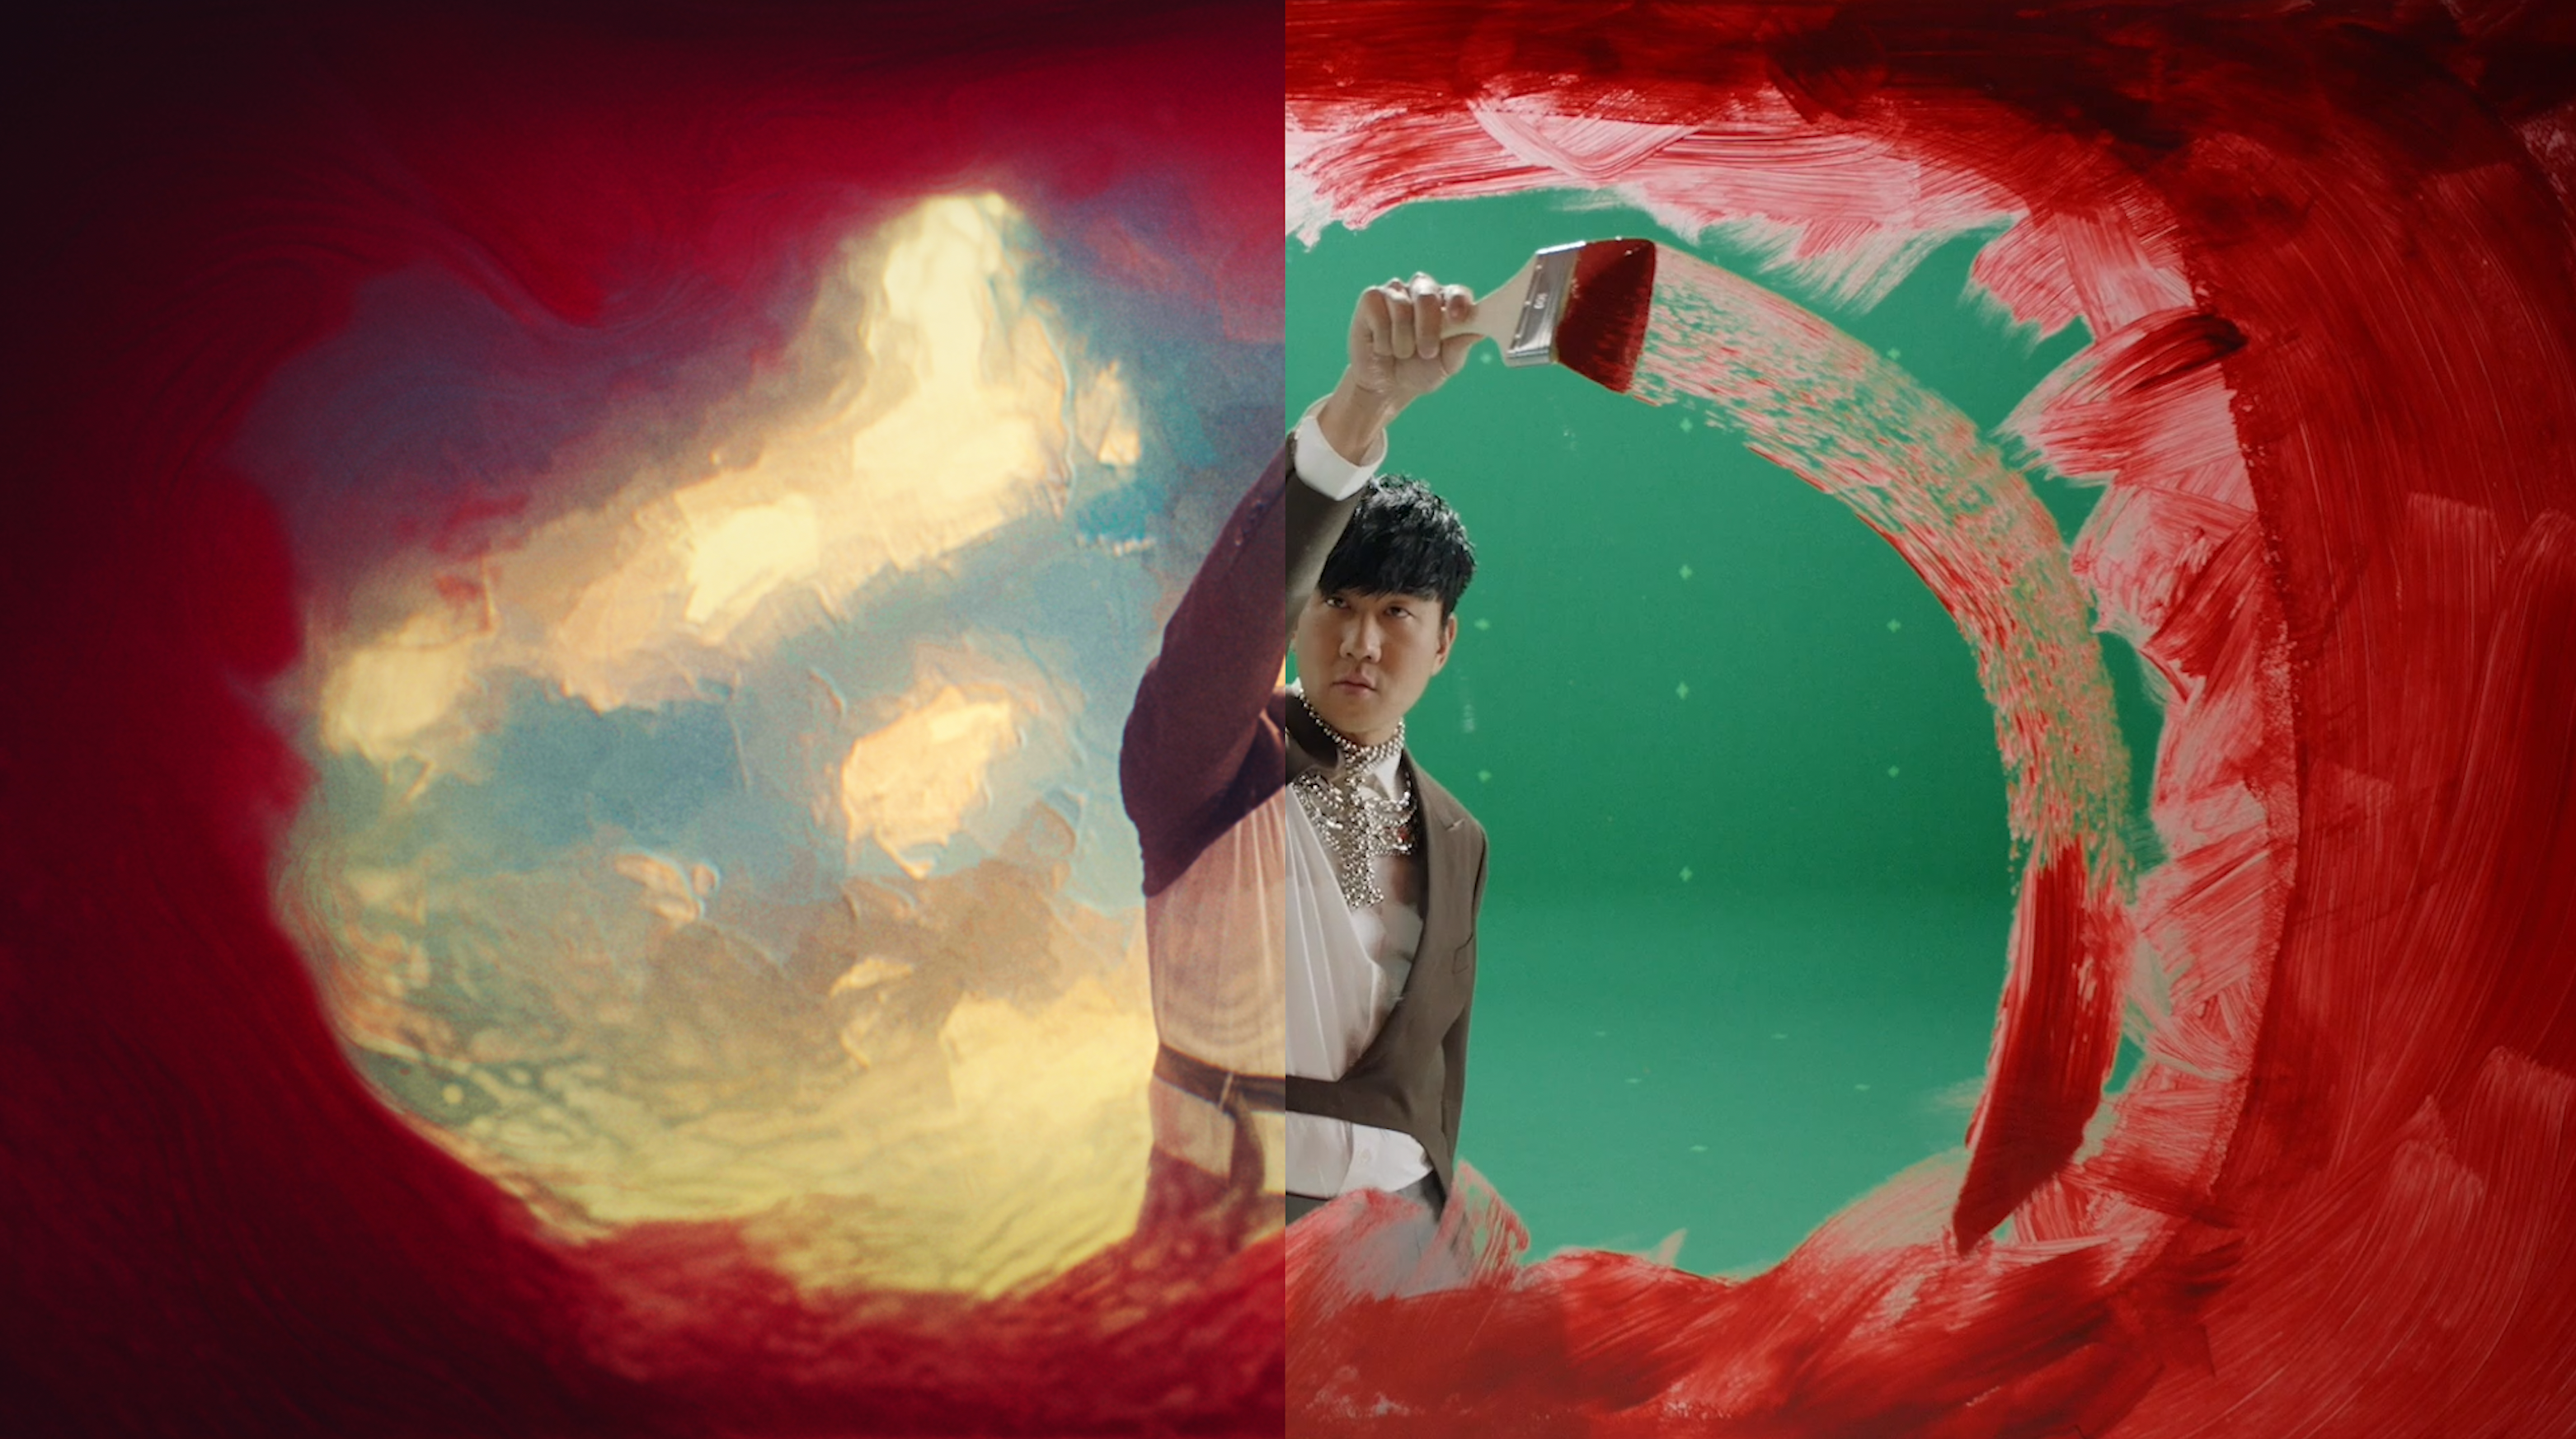 JJ Lin using AI to paint on a screen